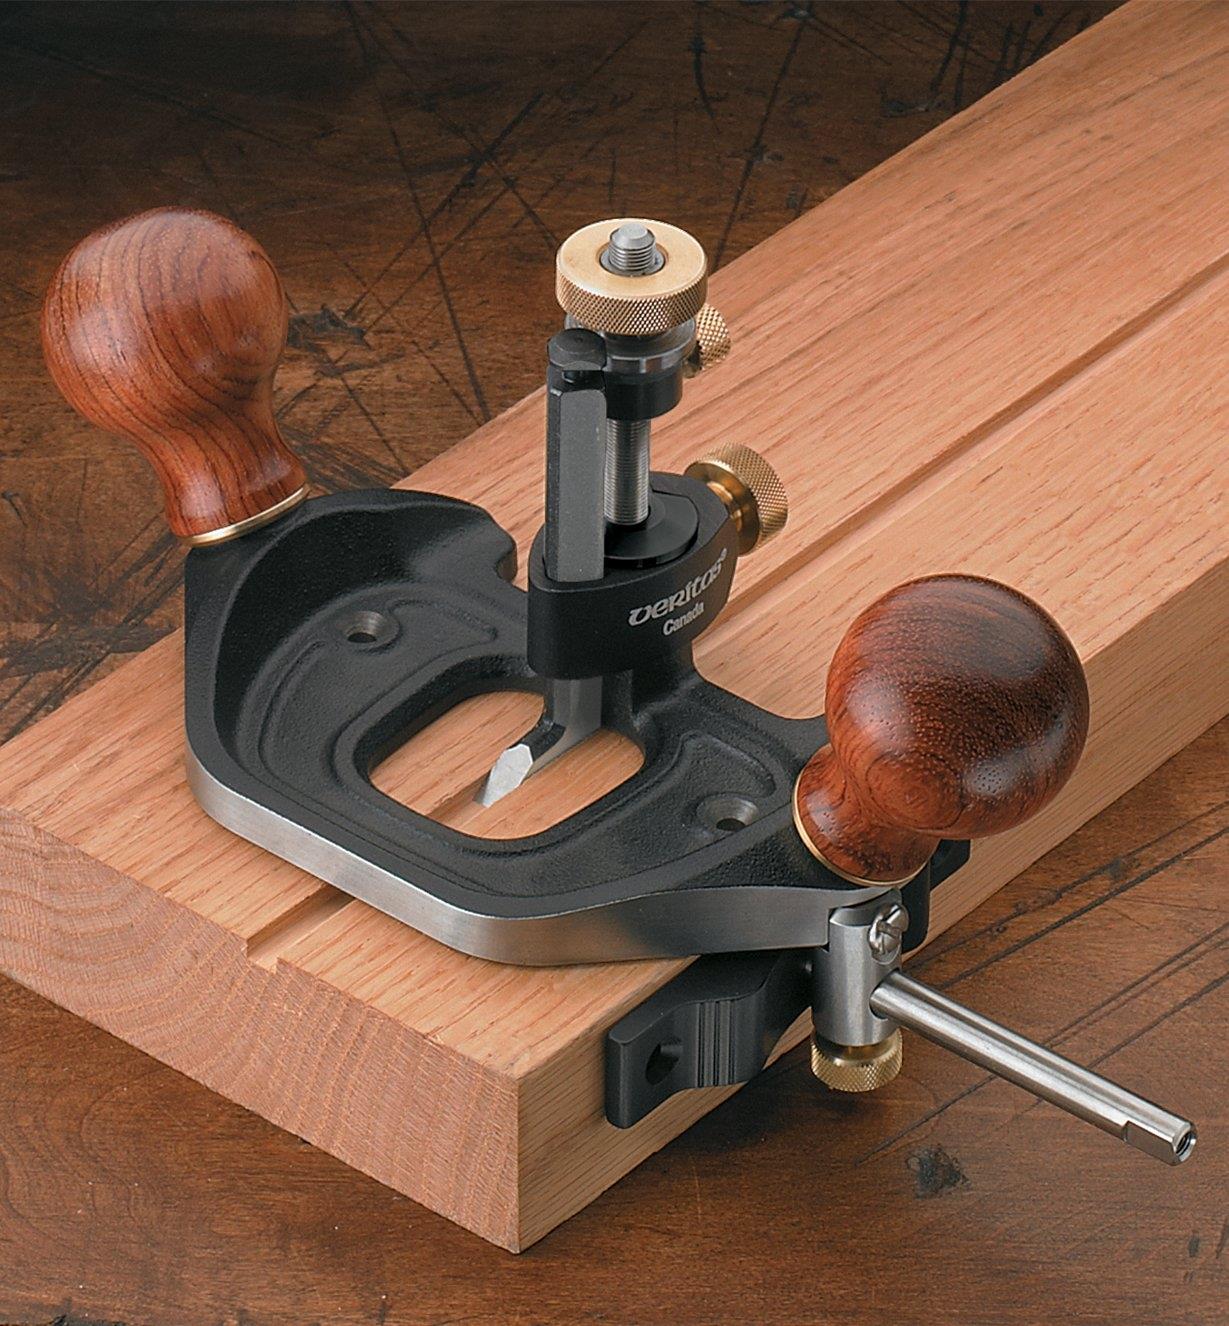 Large router plane